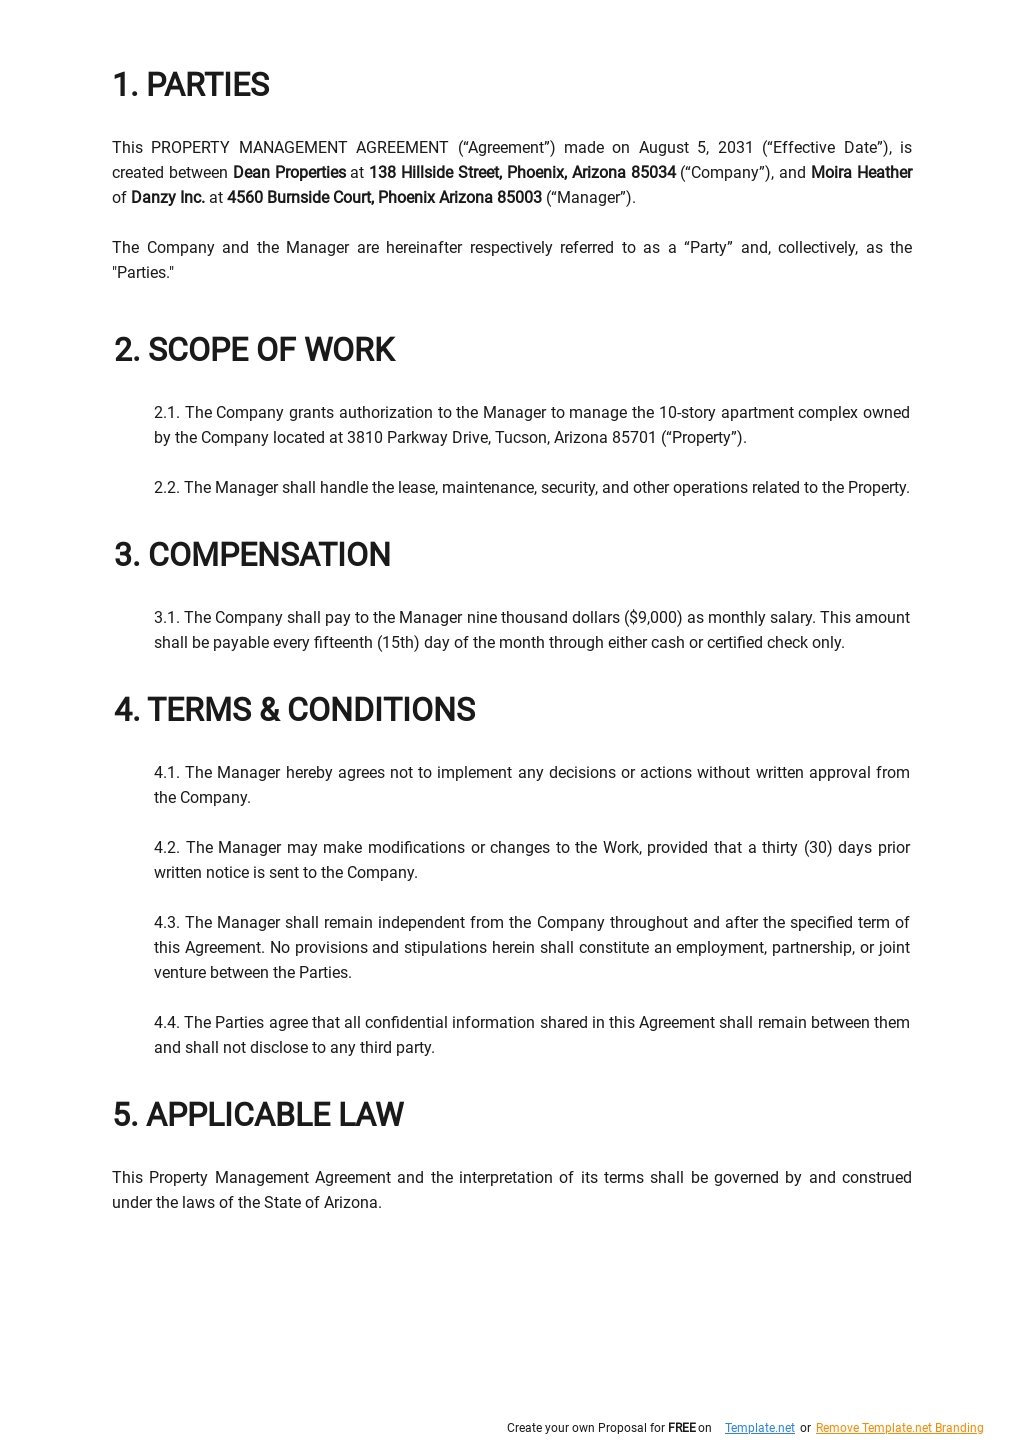 Vacation Rental Property Management Agreement Template 1.jpe